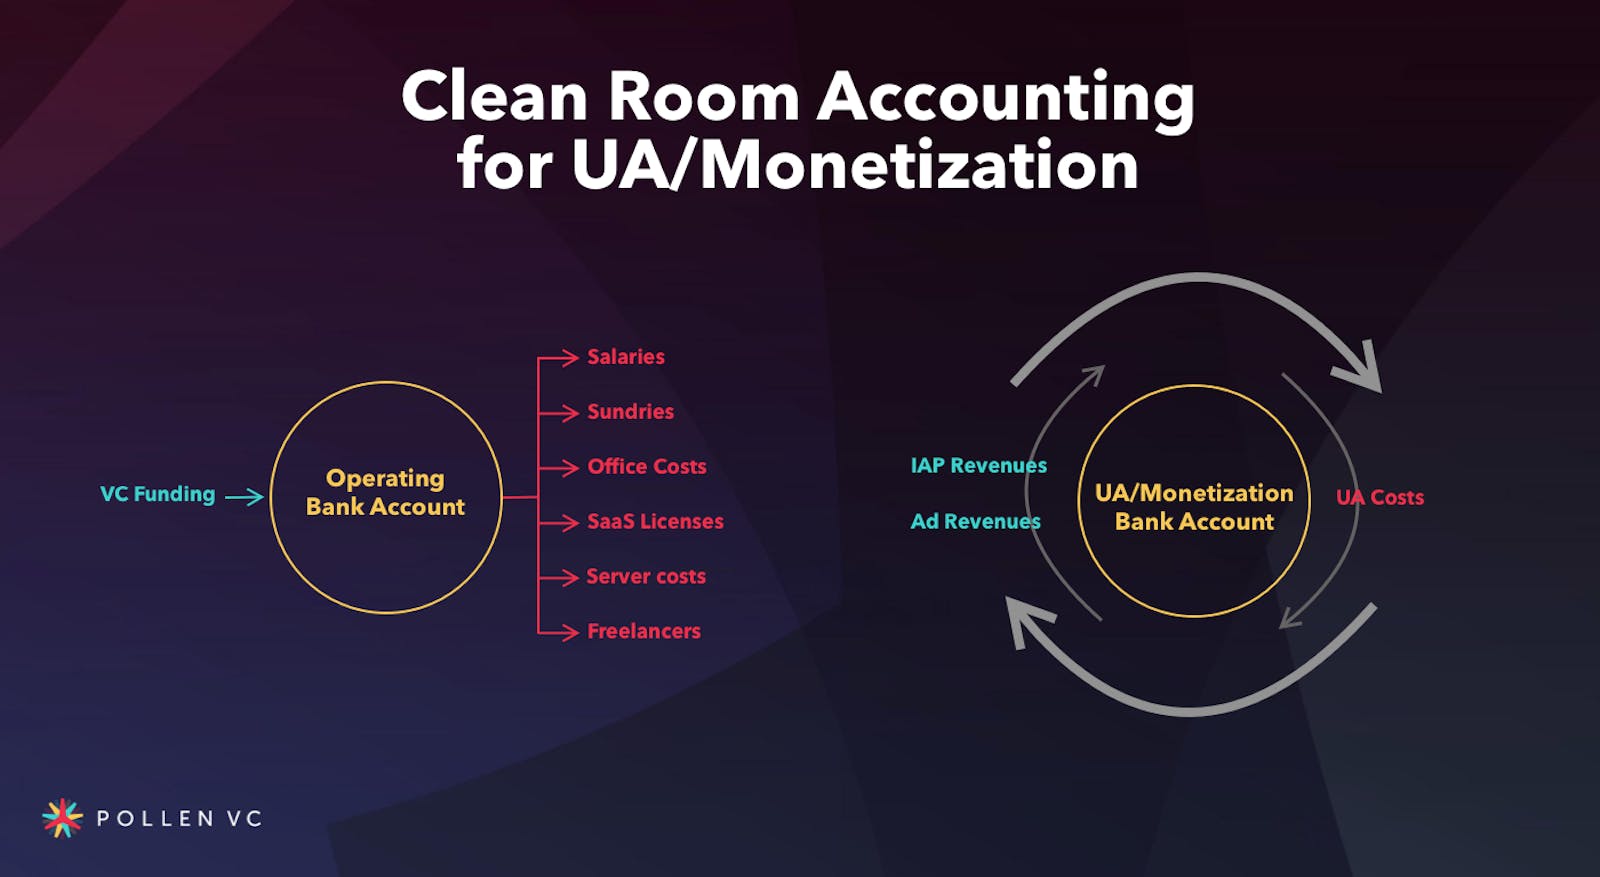 Clean room accounting for UA/monetization